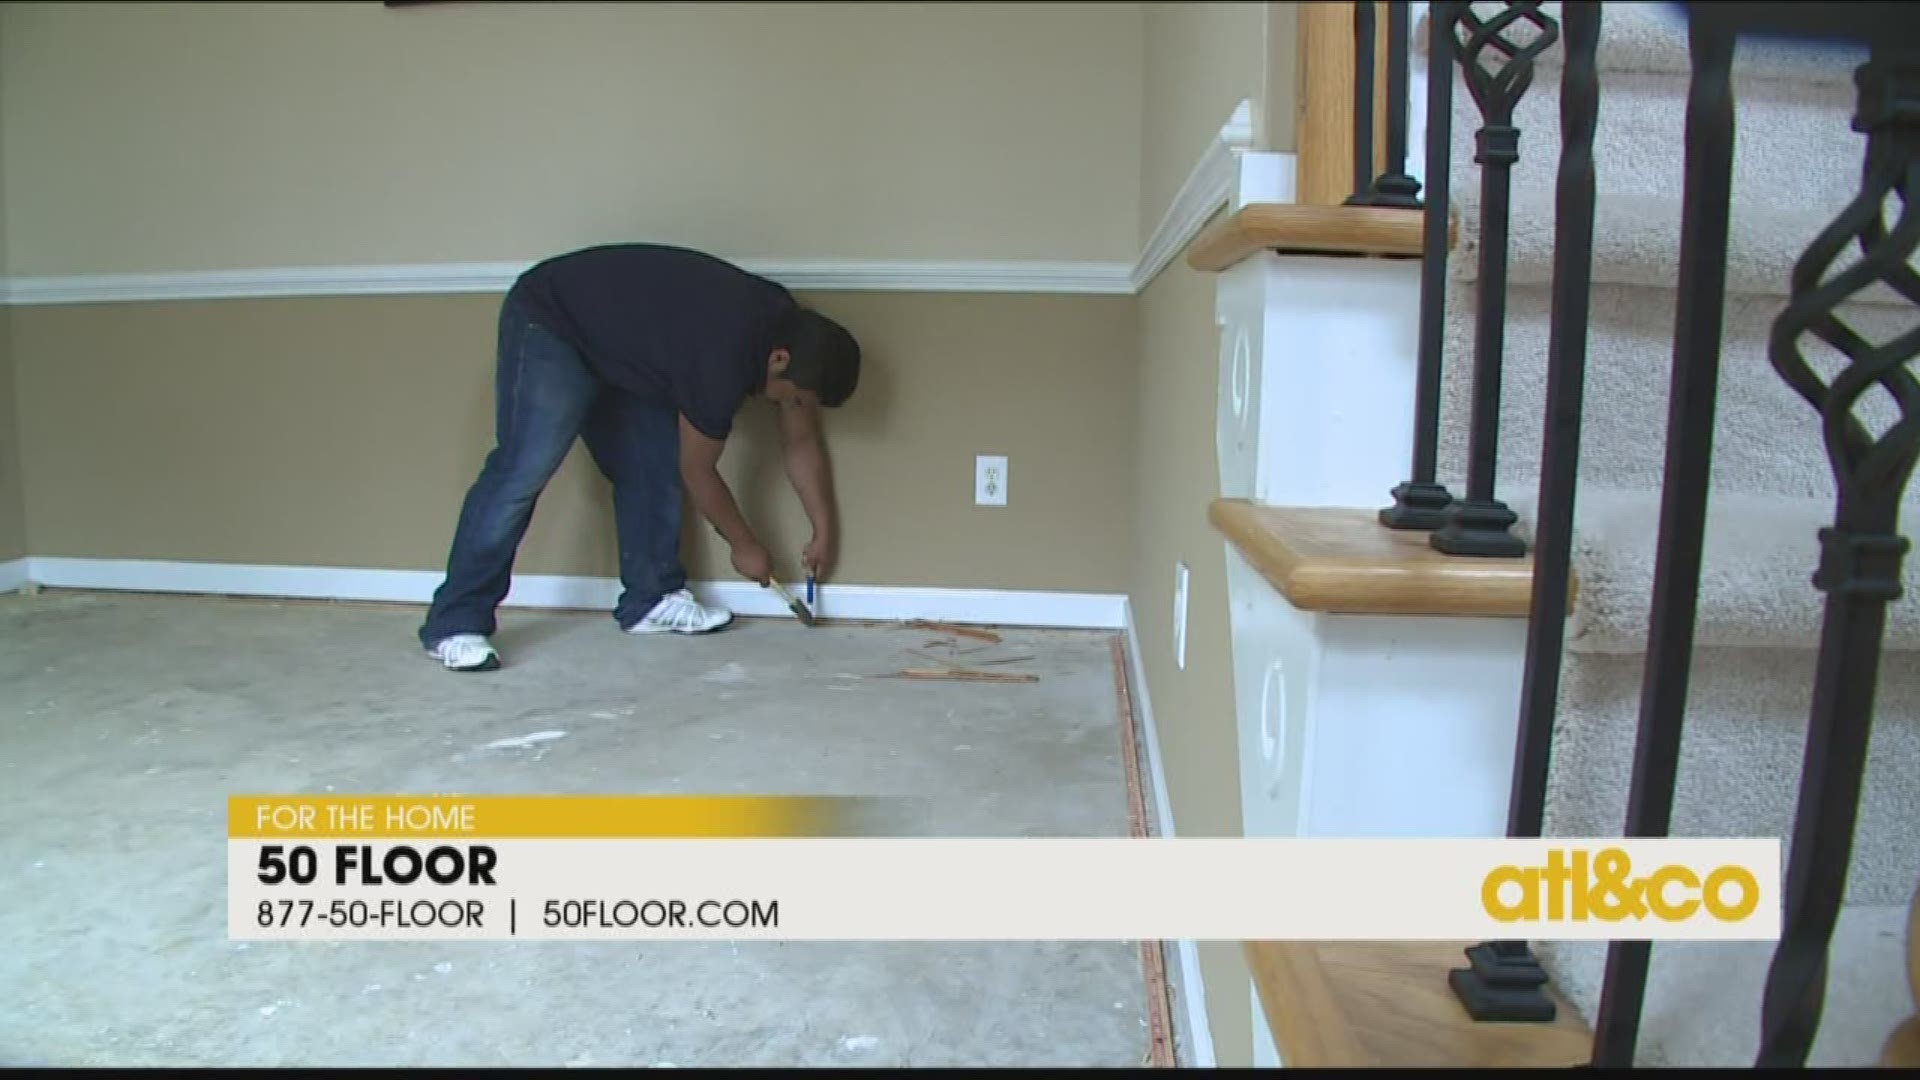 It's a renovation project made easy. Give your home an upgrade with 50 Floor